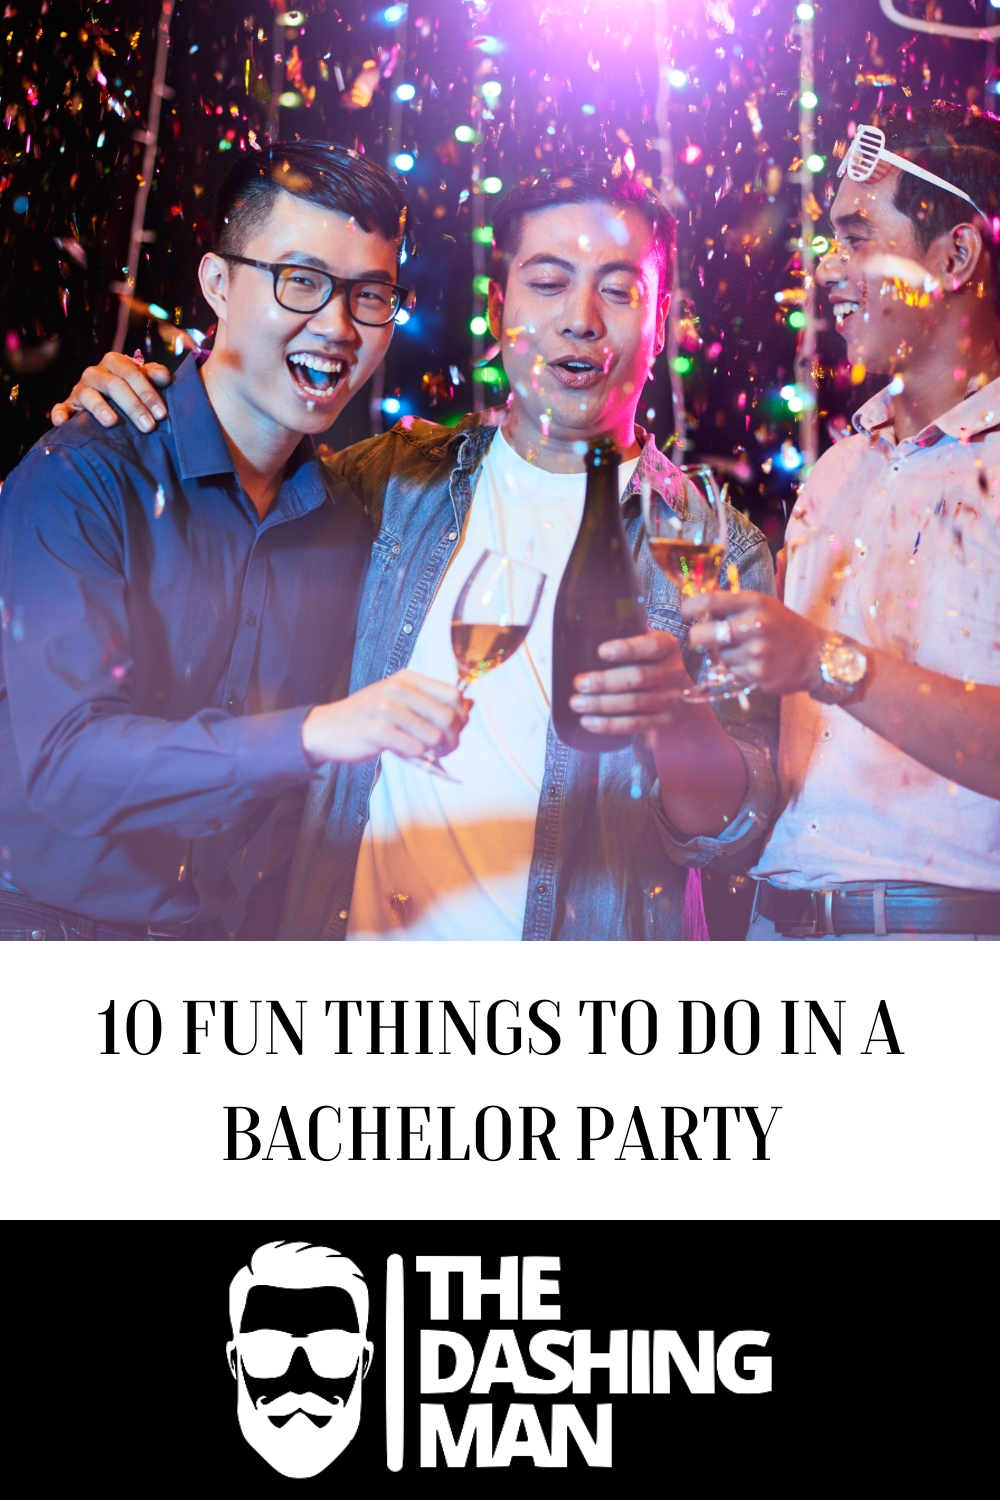 10 Fun Things to Do in a Bachelor Party